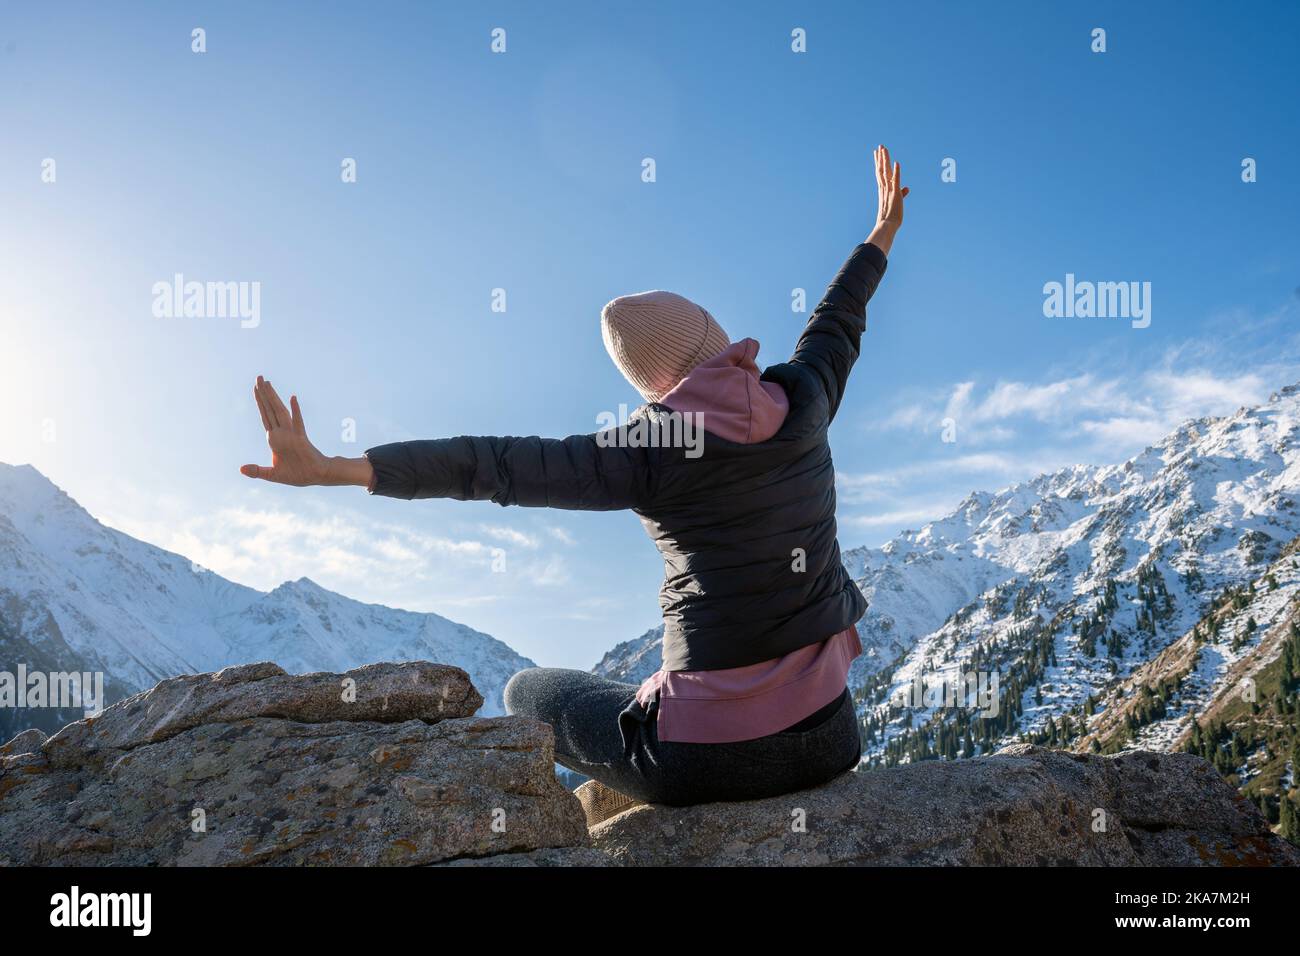 Elated woman with hands outstretched like wings on a vantage in snowy mountains on a sunny day. She is sitting on a boulder. Stock Photo